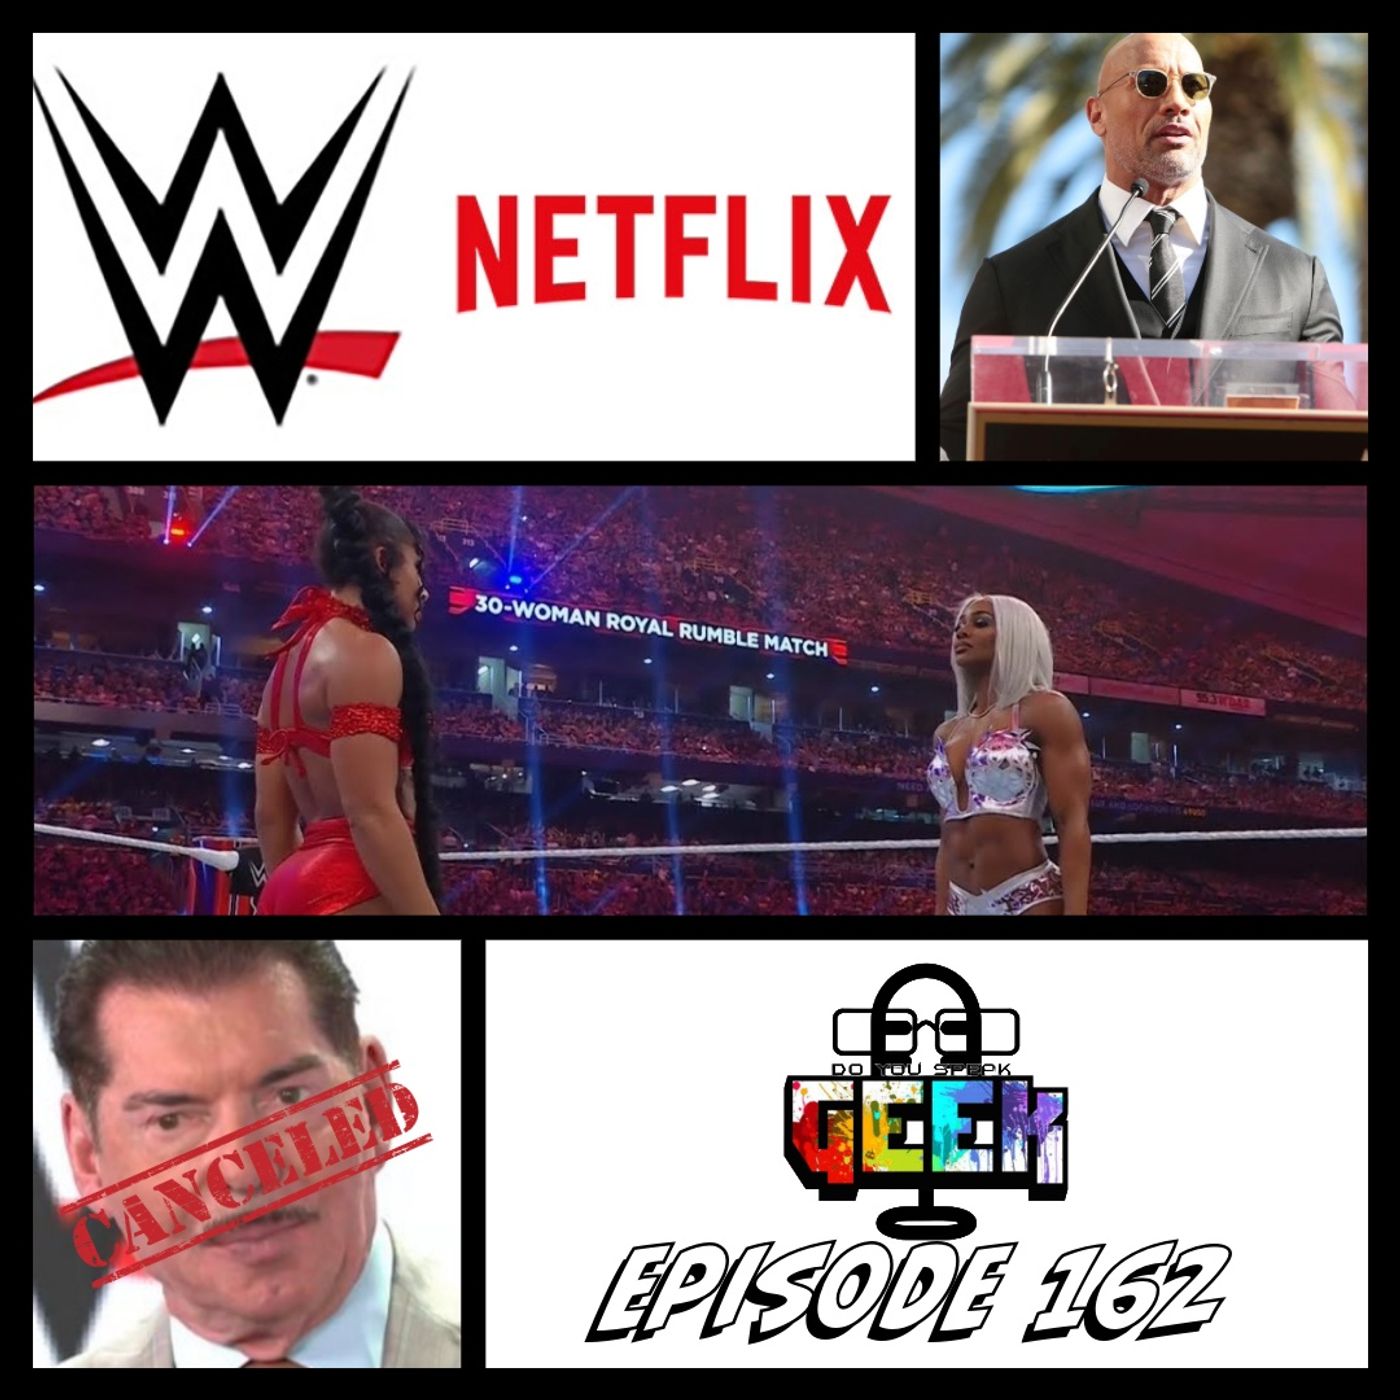 Episode 162 (WWE/Netflix, Vince McMahon, Royal Rumble, The Rock, and much more)